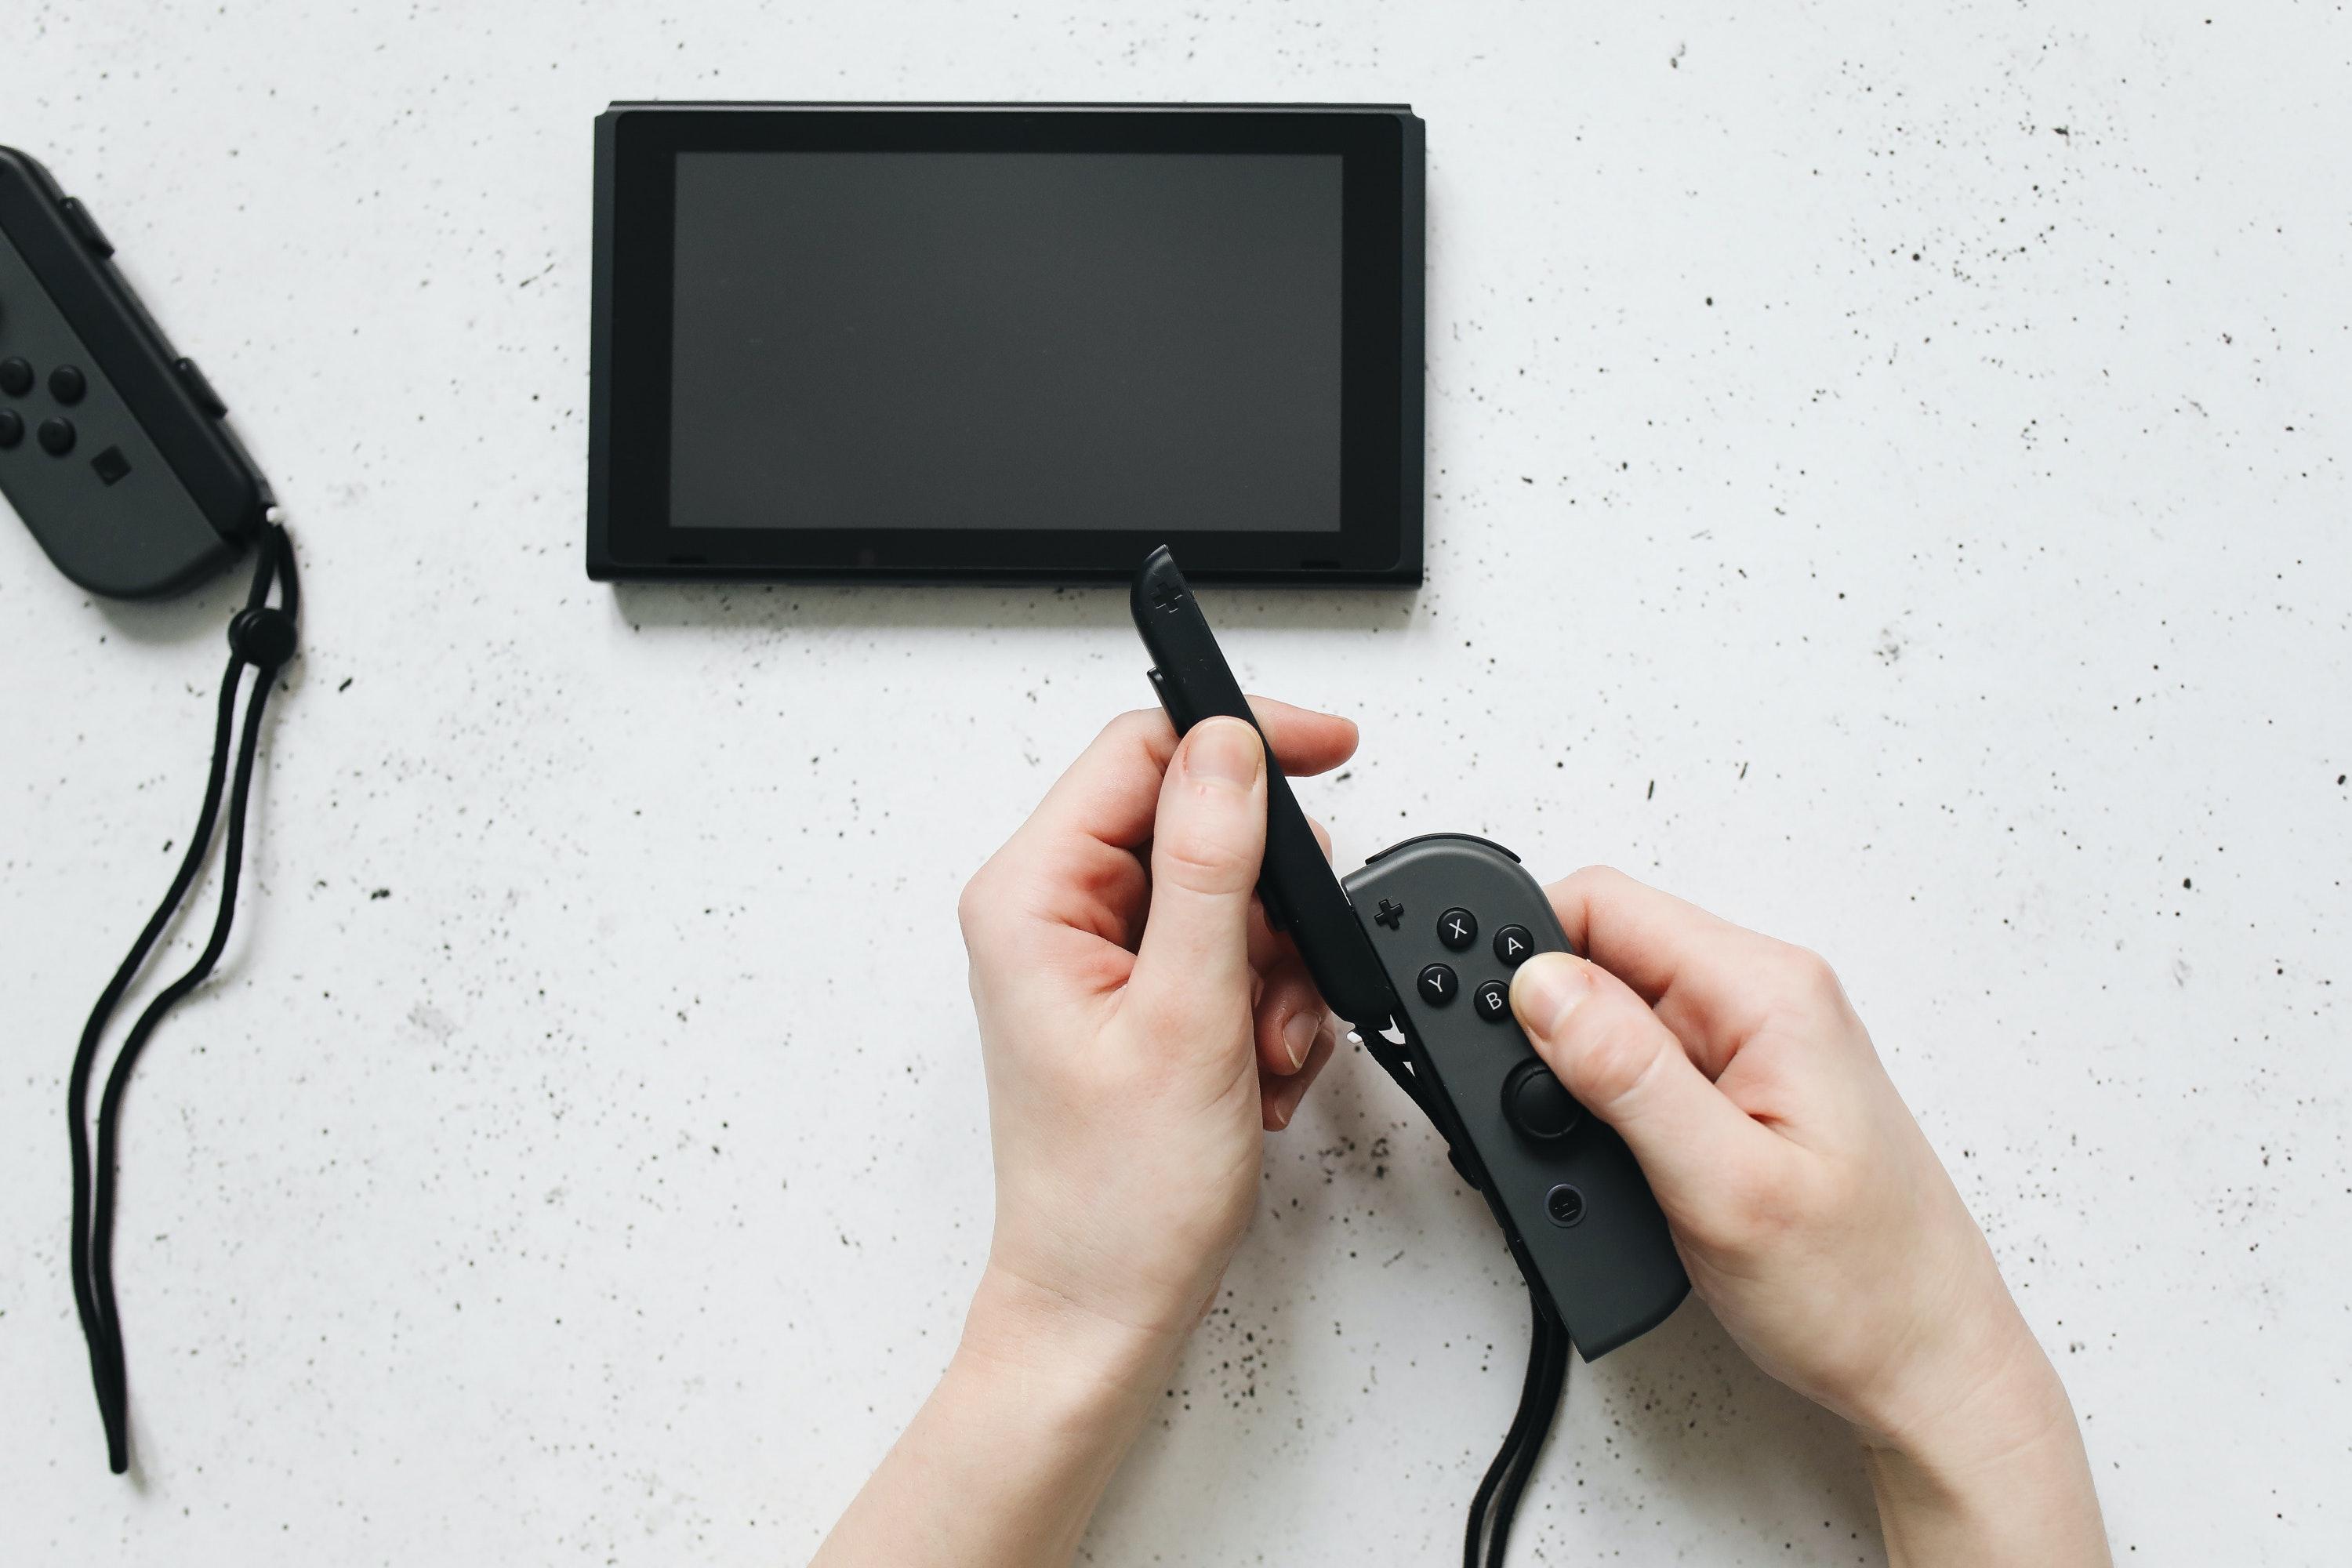 Why did Nintendo discontinue the Switch?